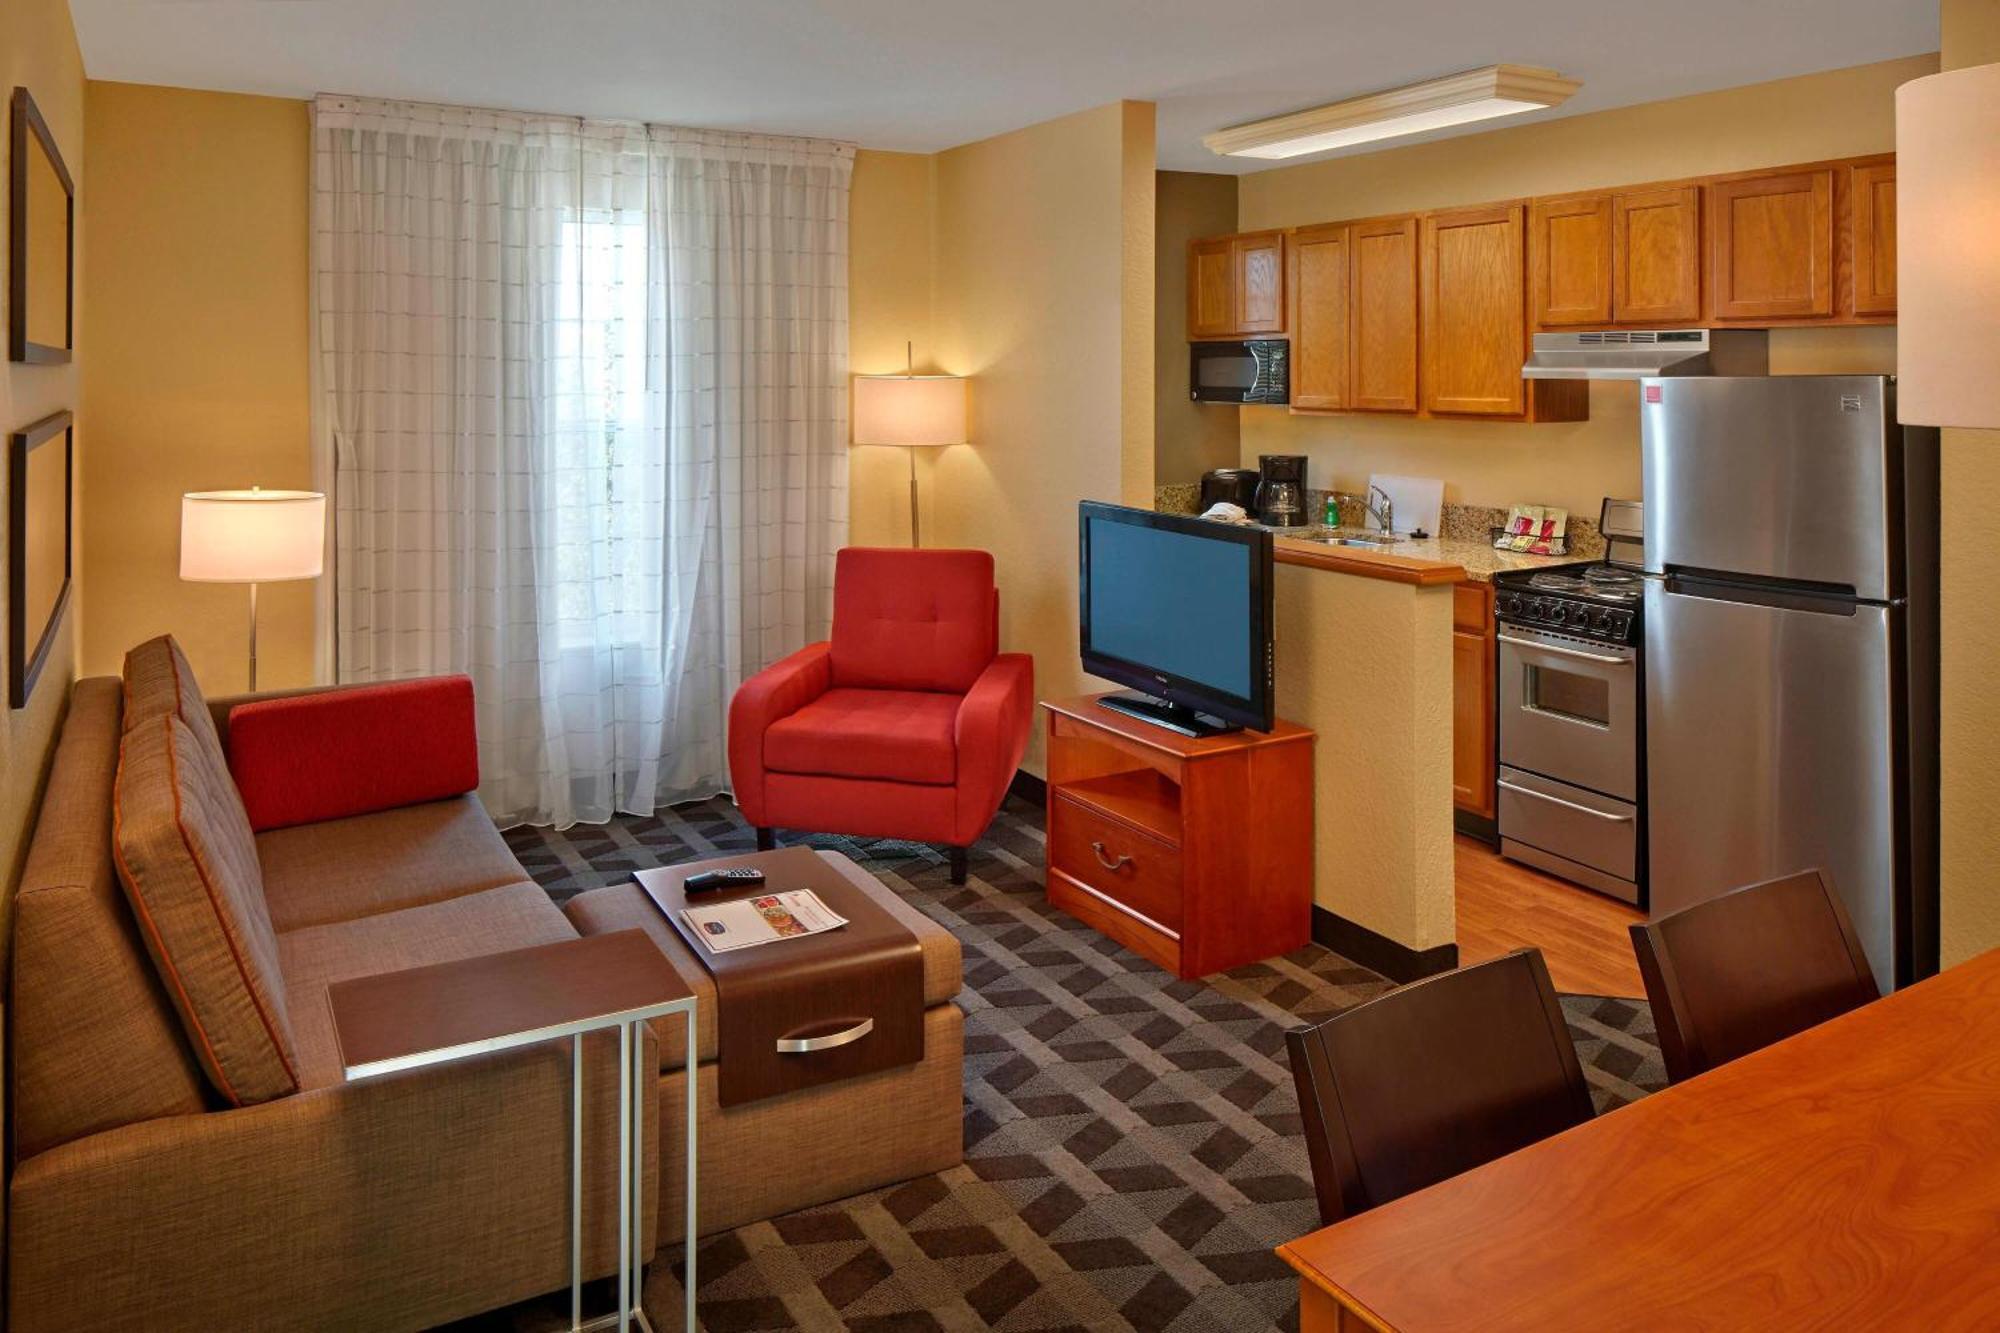 Towneplace Suites By Marriott Orlando East/Ucf Area מראה חיצוני תמונה